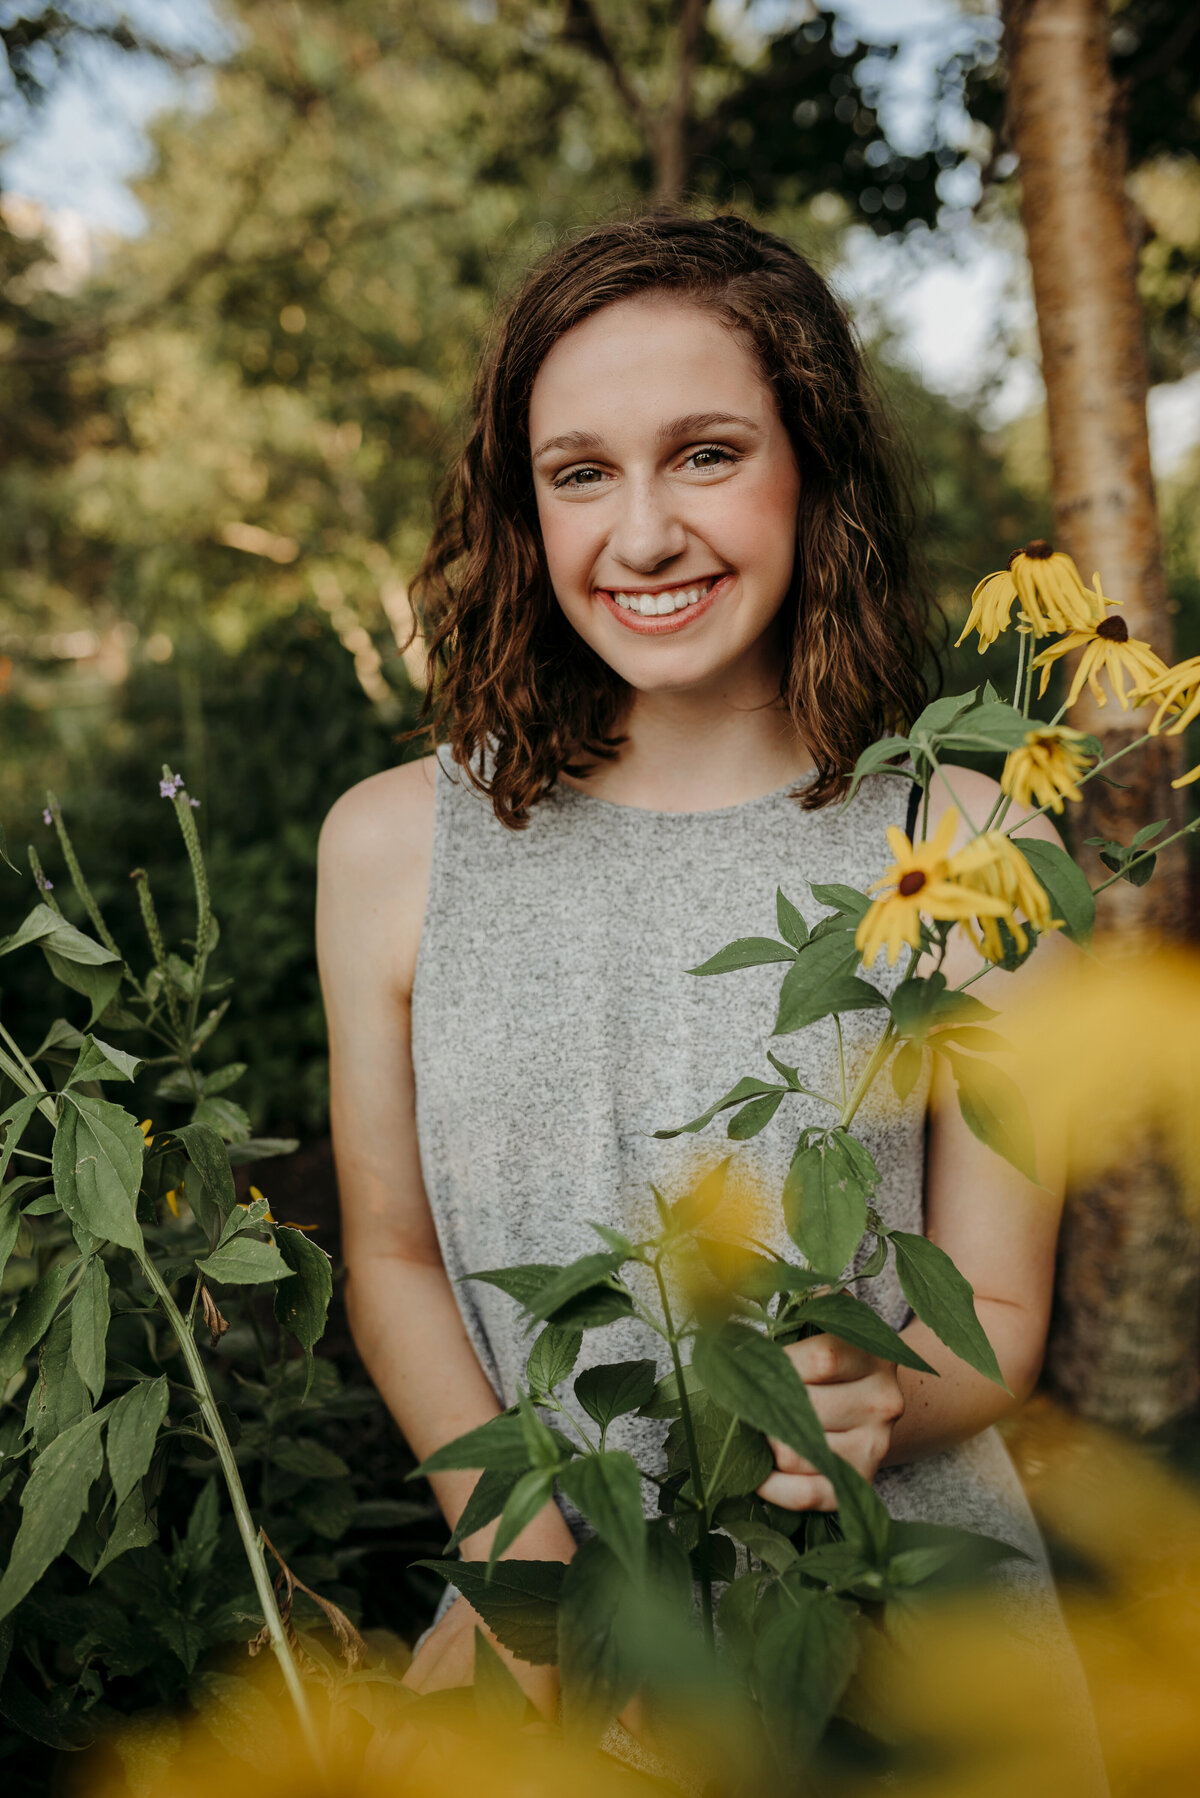 Find inspiration in meadow muse with senior portraits set in expansive fields. Shannon Kathleen Photography turns each moment into a canvas for your unique story. Schedule now.